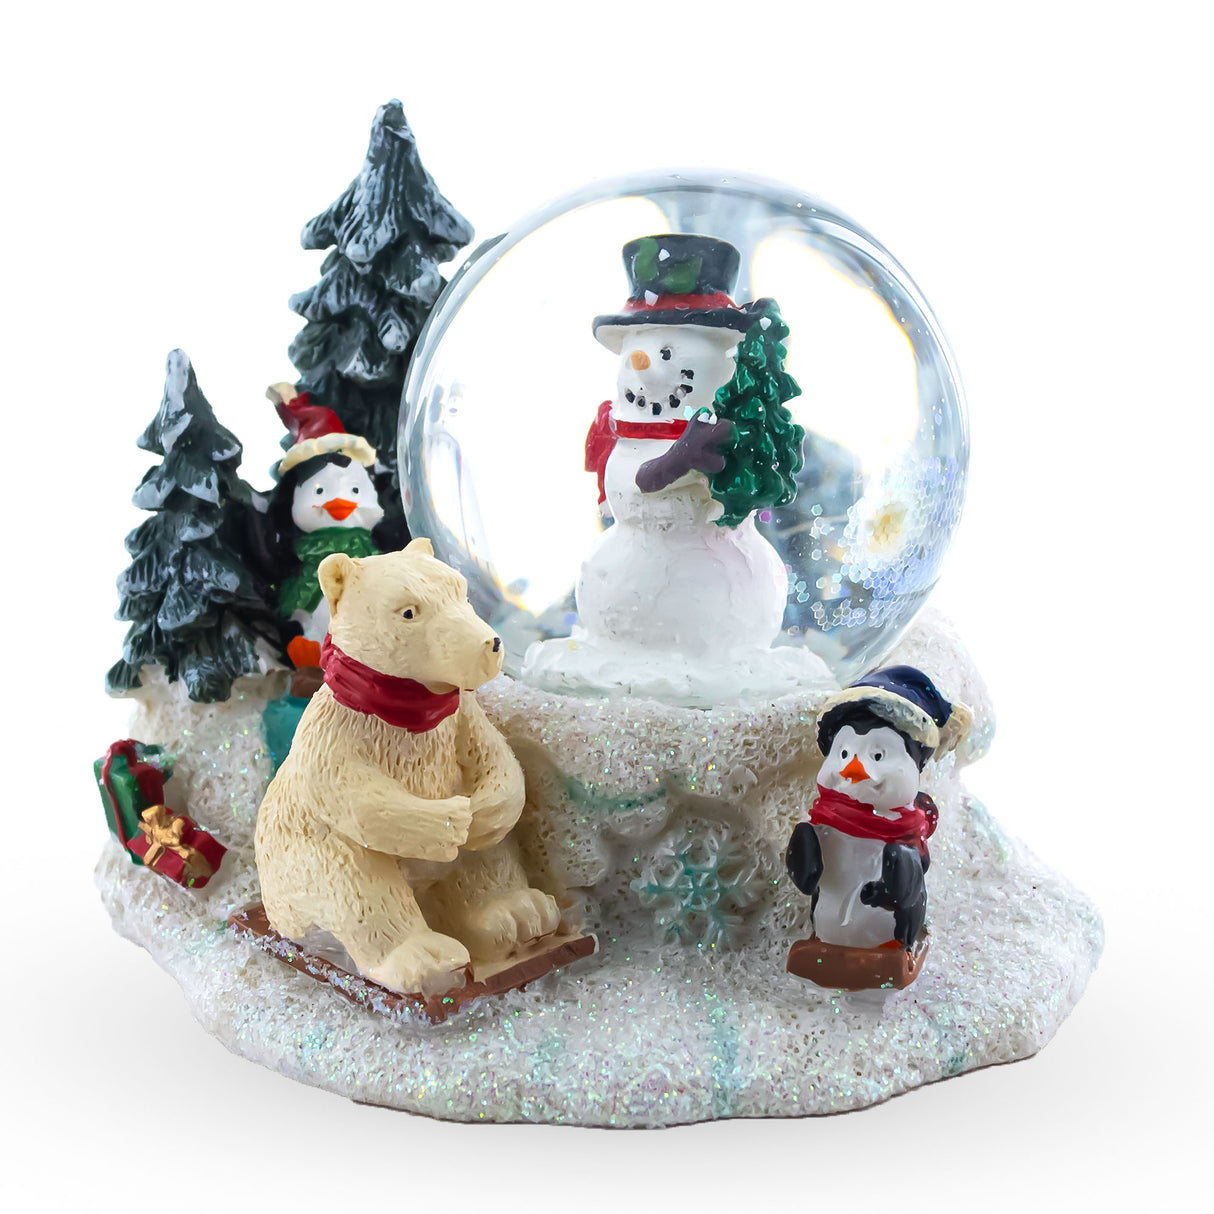 Arctic Animals Mini Water Snow Globe: Snowman, Polar Bear, and Penguins in White color, Round shape